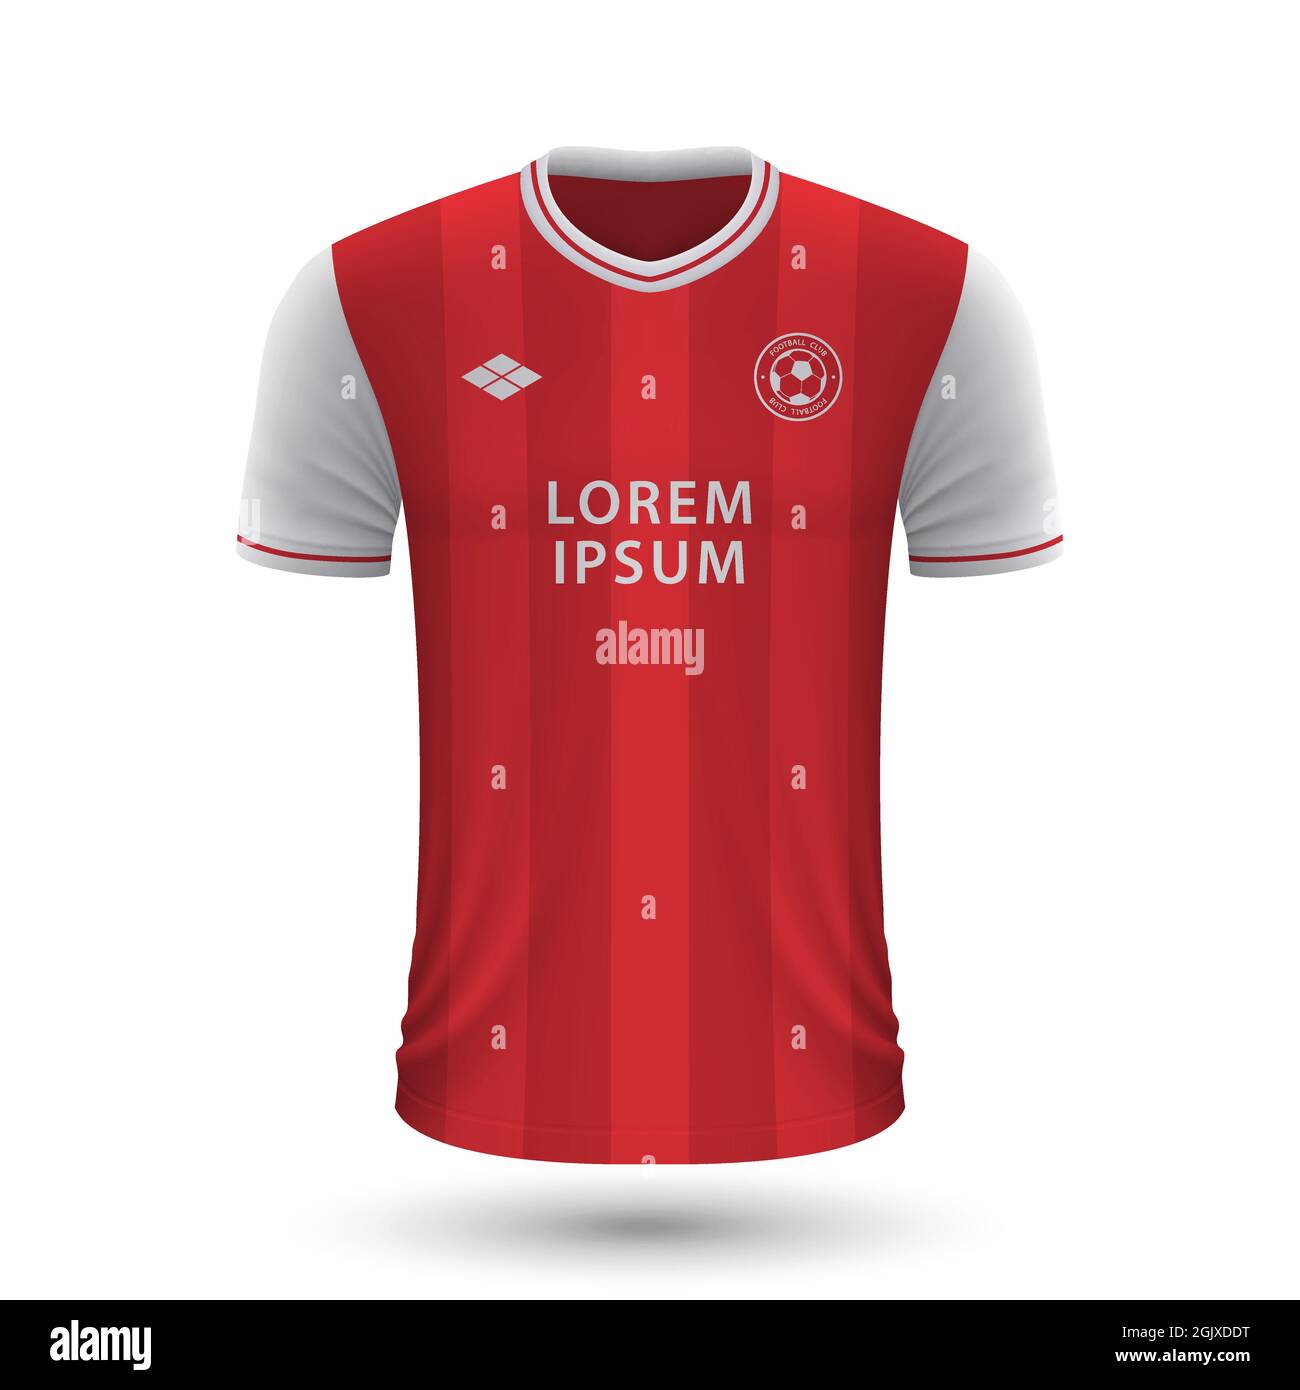 Realistic soccer shirt Reims 2022, jersey template for football kit ...